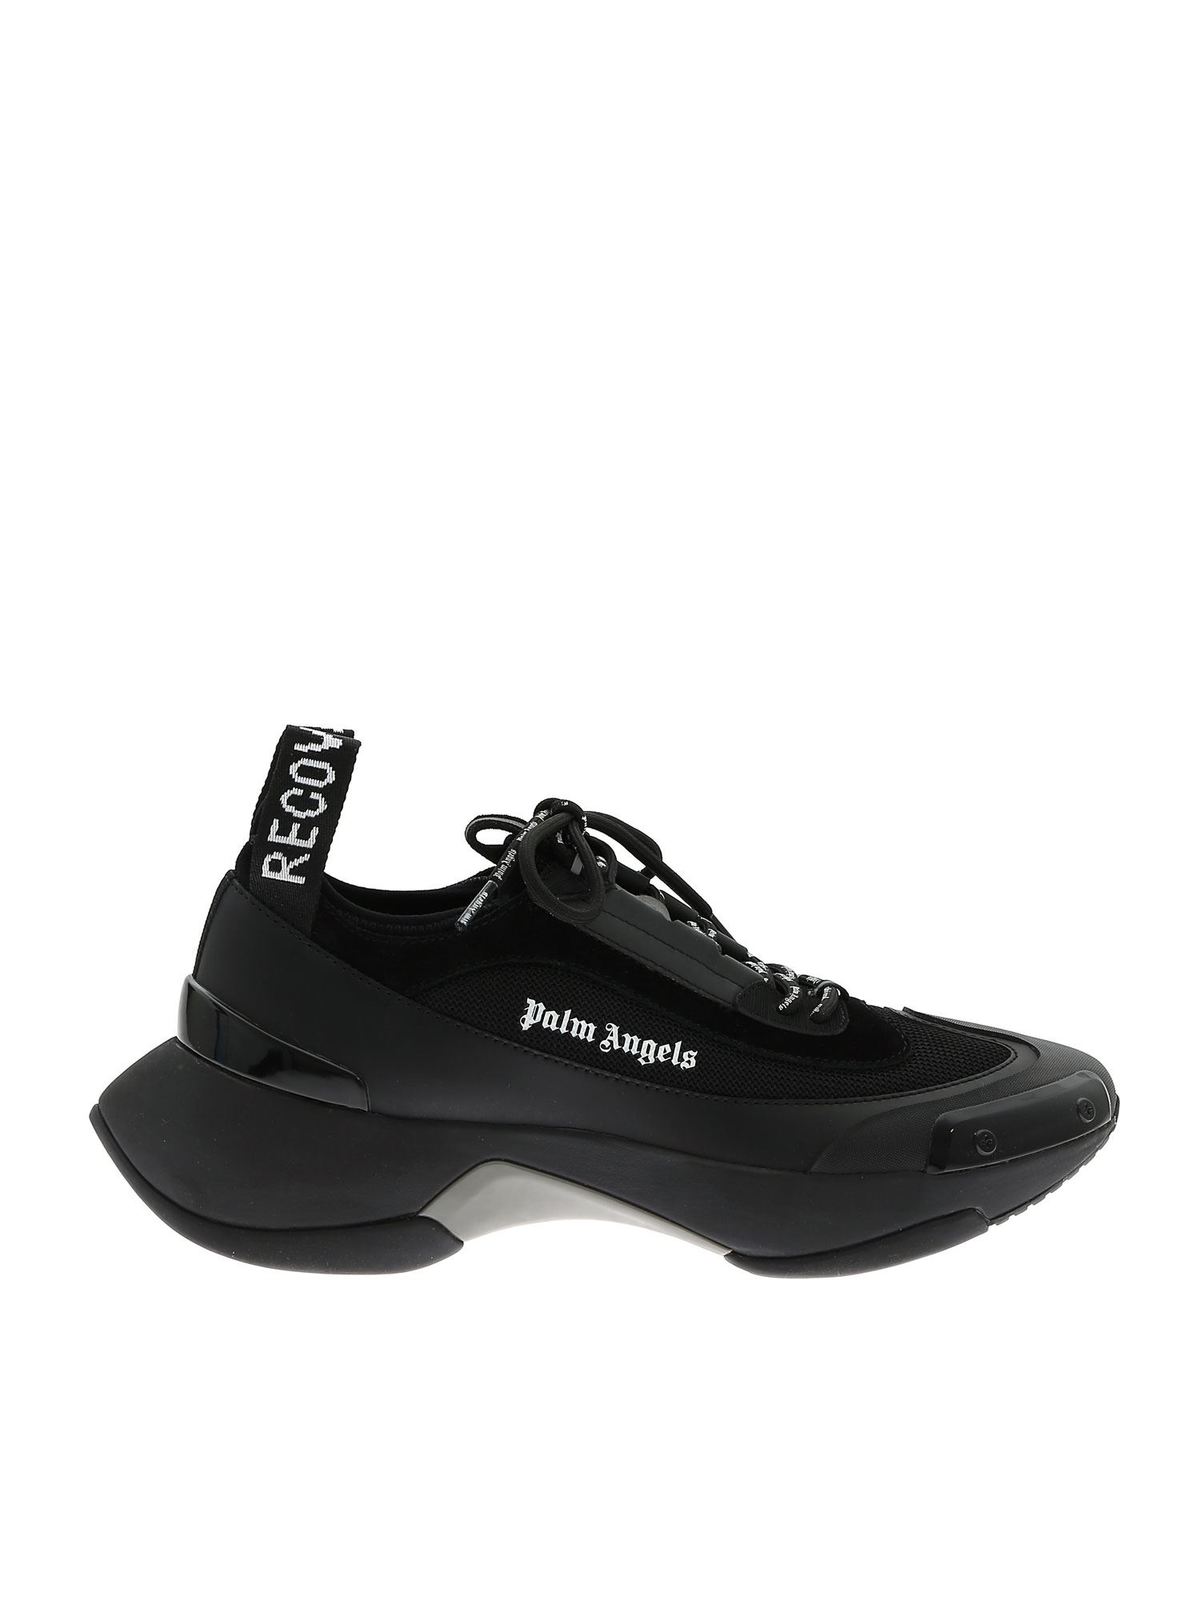 Palm Angels Recovery Sneaker  スニーカー